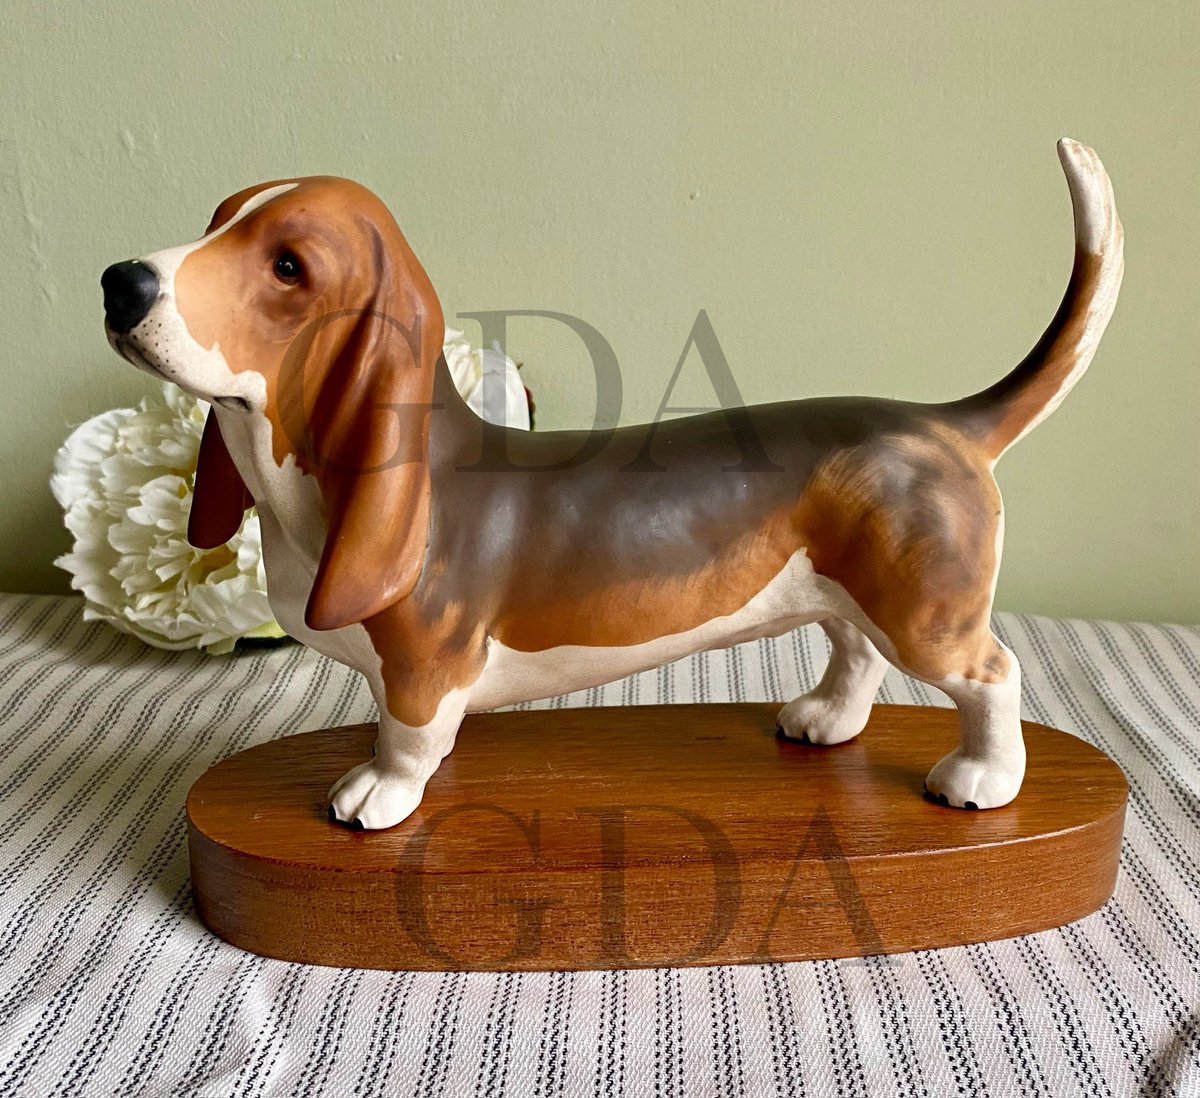 Good morning #earlybiz
🐶🐶🐶 🐶
Meet this handsome Beswick Basset Hound. 
Meet him and more at,
Dieudonneart.com/antiques 

#dogs #Beswick #collectables #vintage #elevenseshour #hounds #shopsmalluk #shopindie #gifts